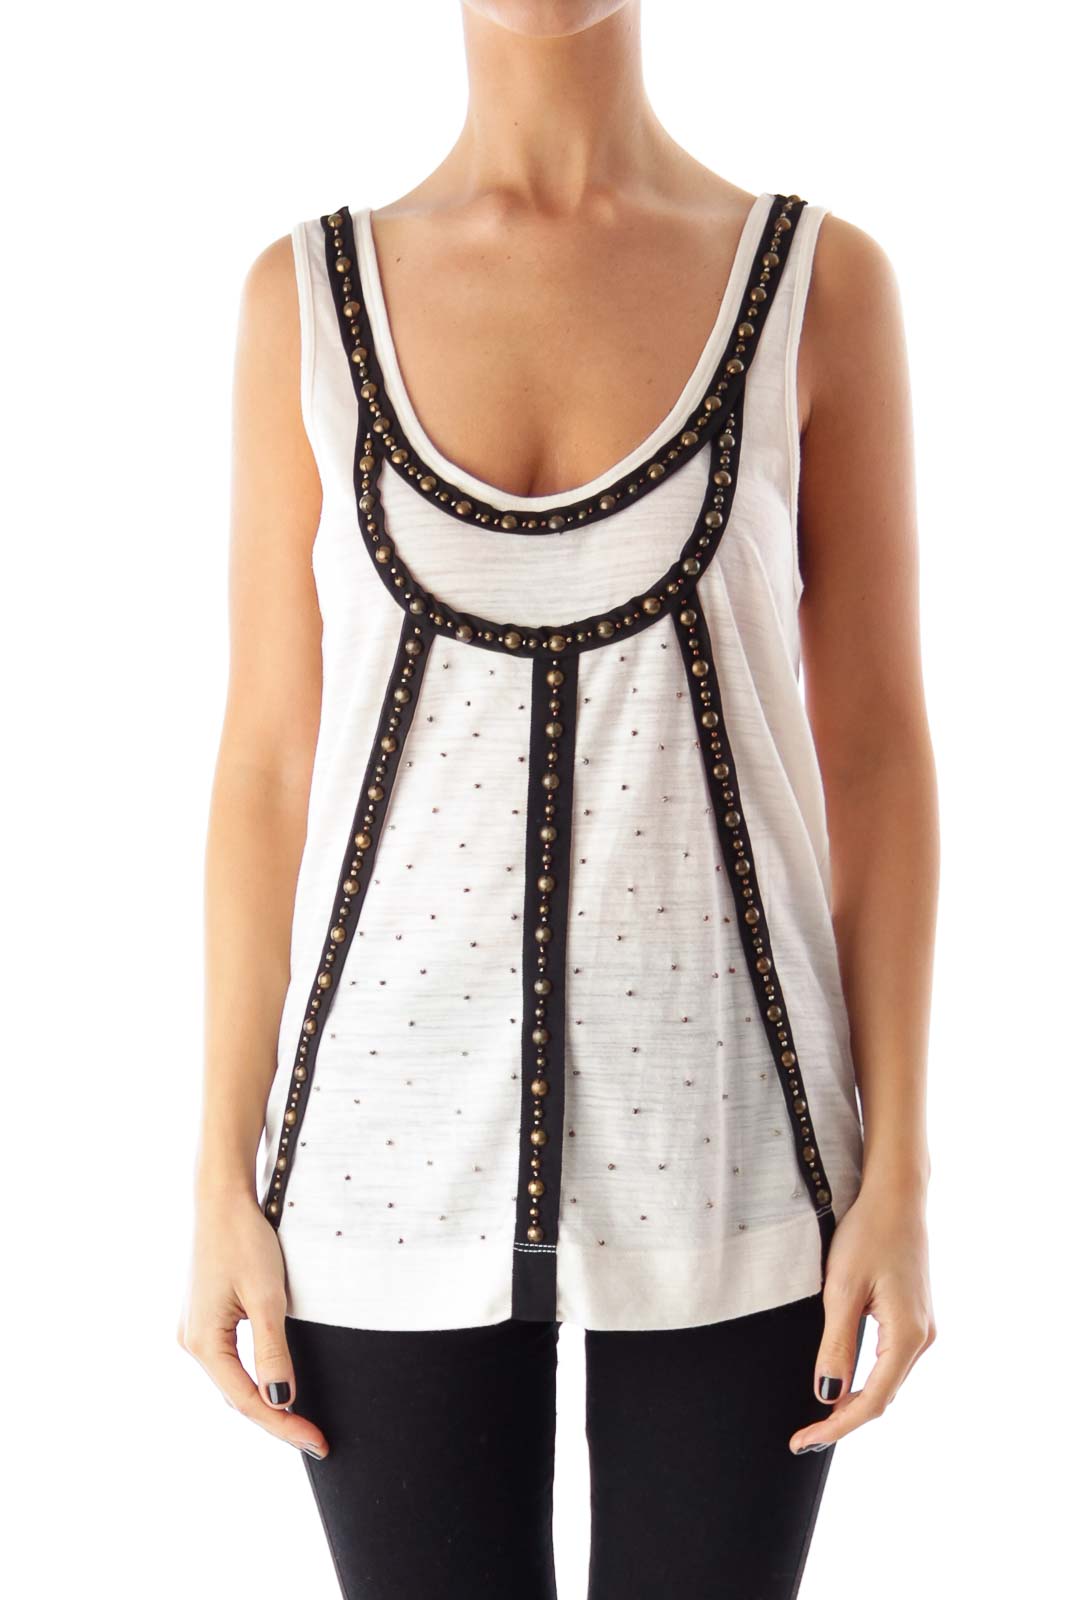 Beige & Black Embroidered Top Front